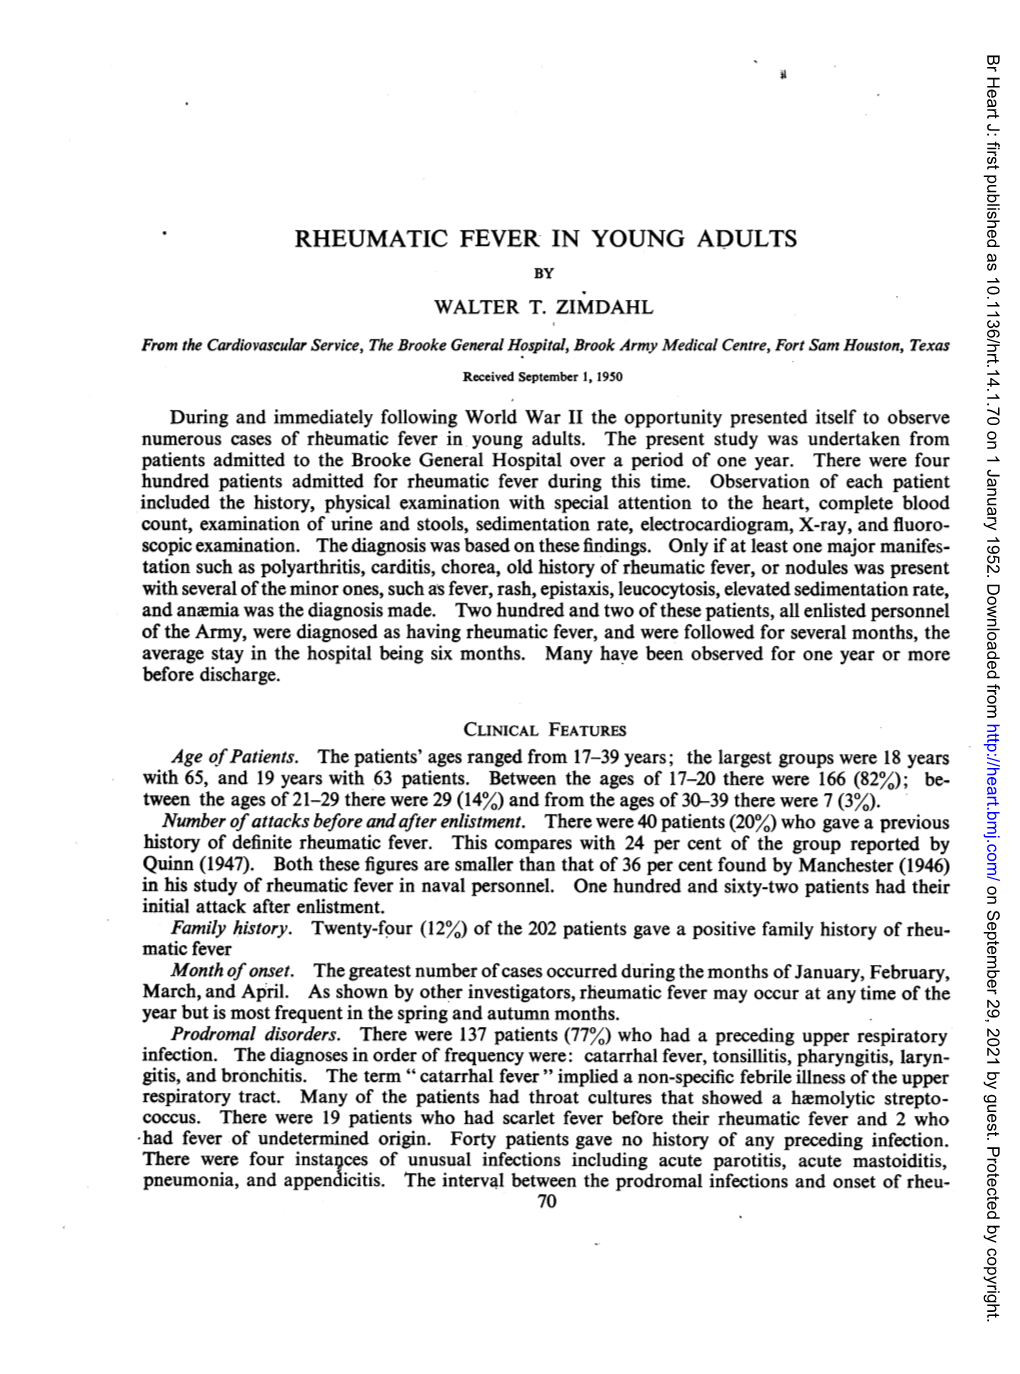 Rheumatic Fever in Young Adults by Walter T